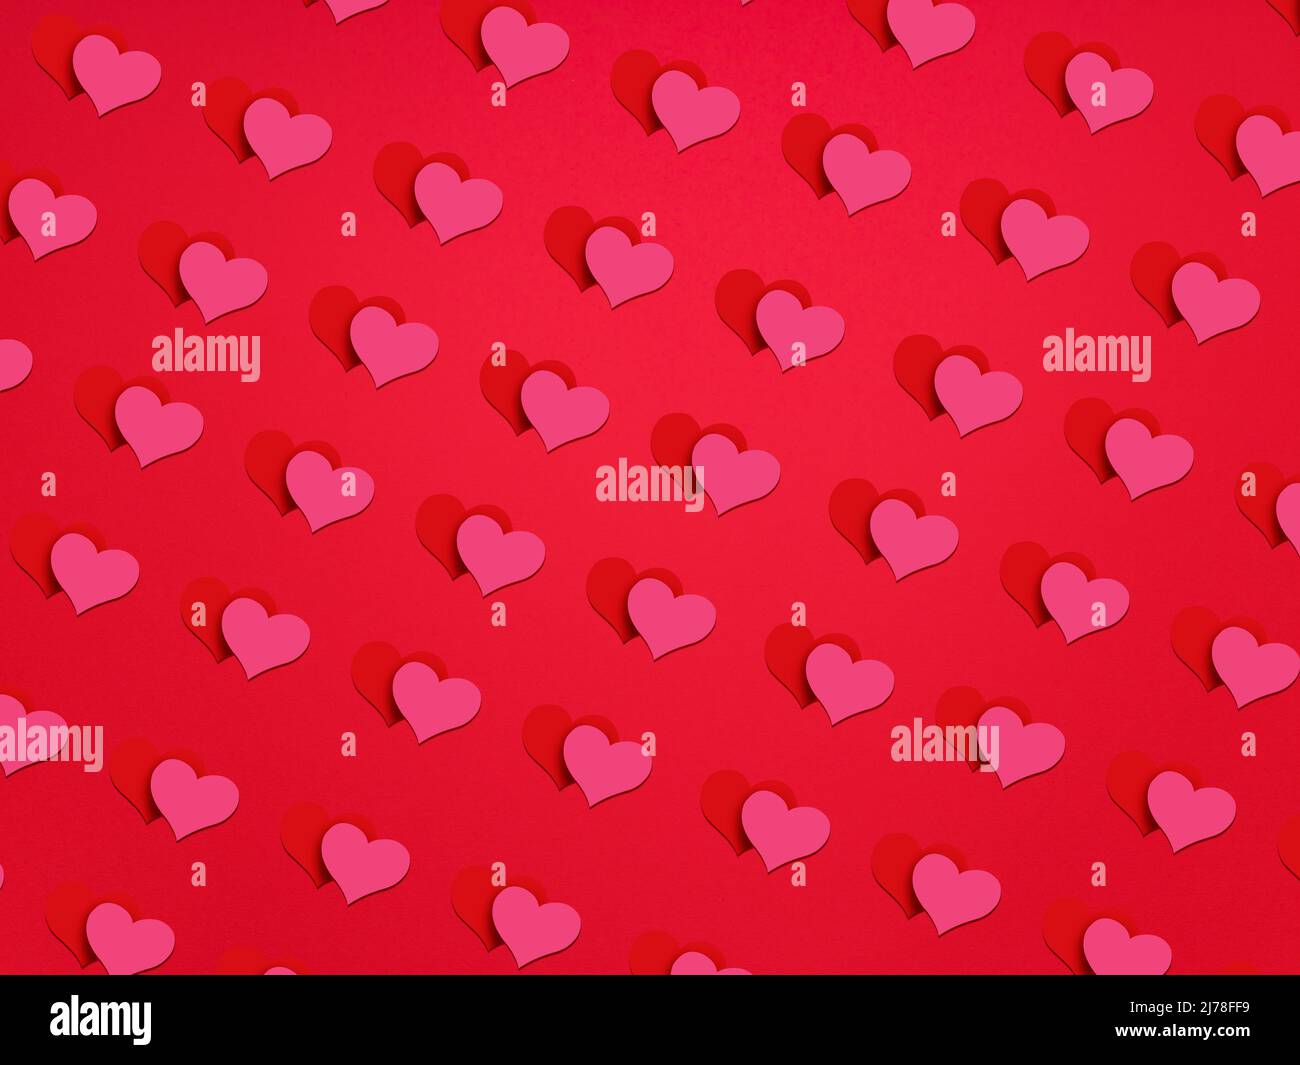 Red background with many double hearts (red and pink), romantic background for Valentine's Day or wedding. Stock Photo